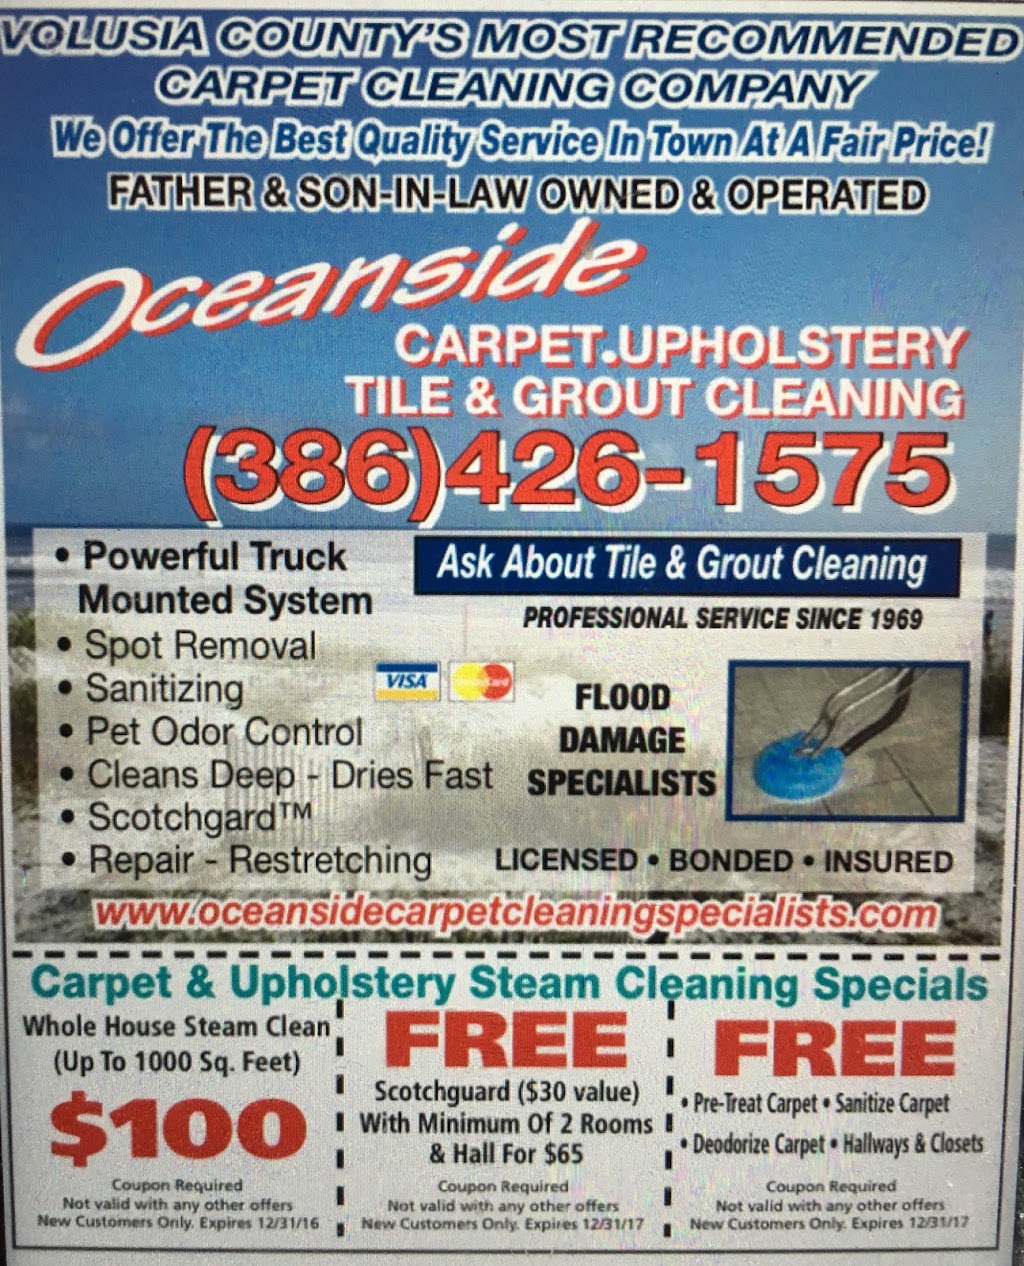 Oceanside Carpet Cleaning Specialists LLC | 4635 Katy Dr, New Smyrna Beach, FL 32169, USA | Phone: (386) 426-1575